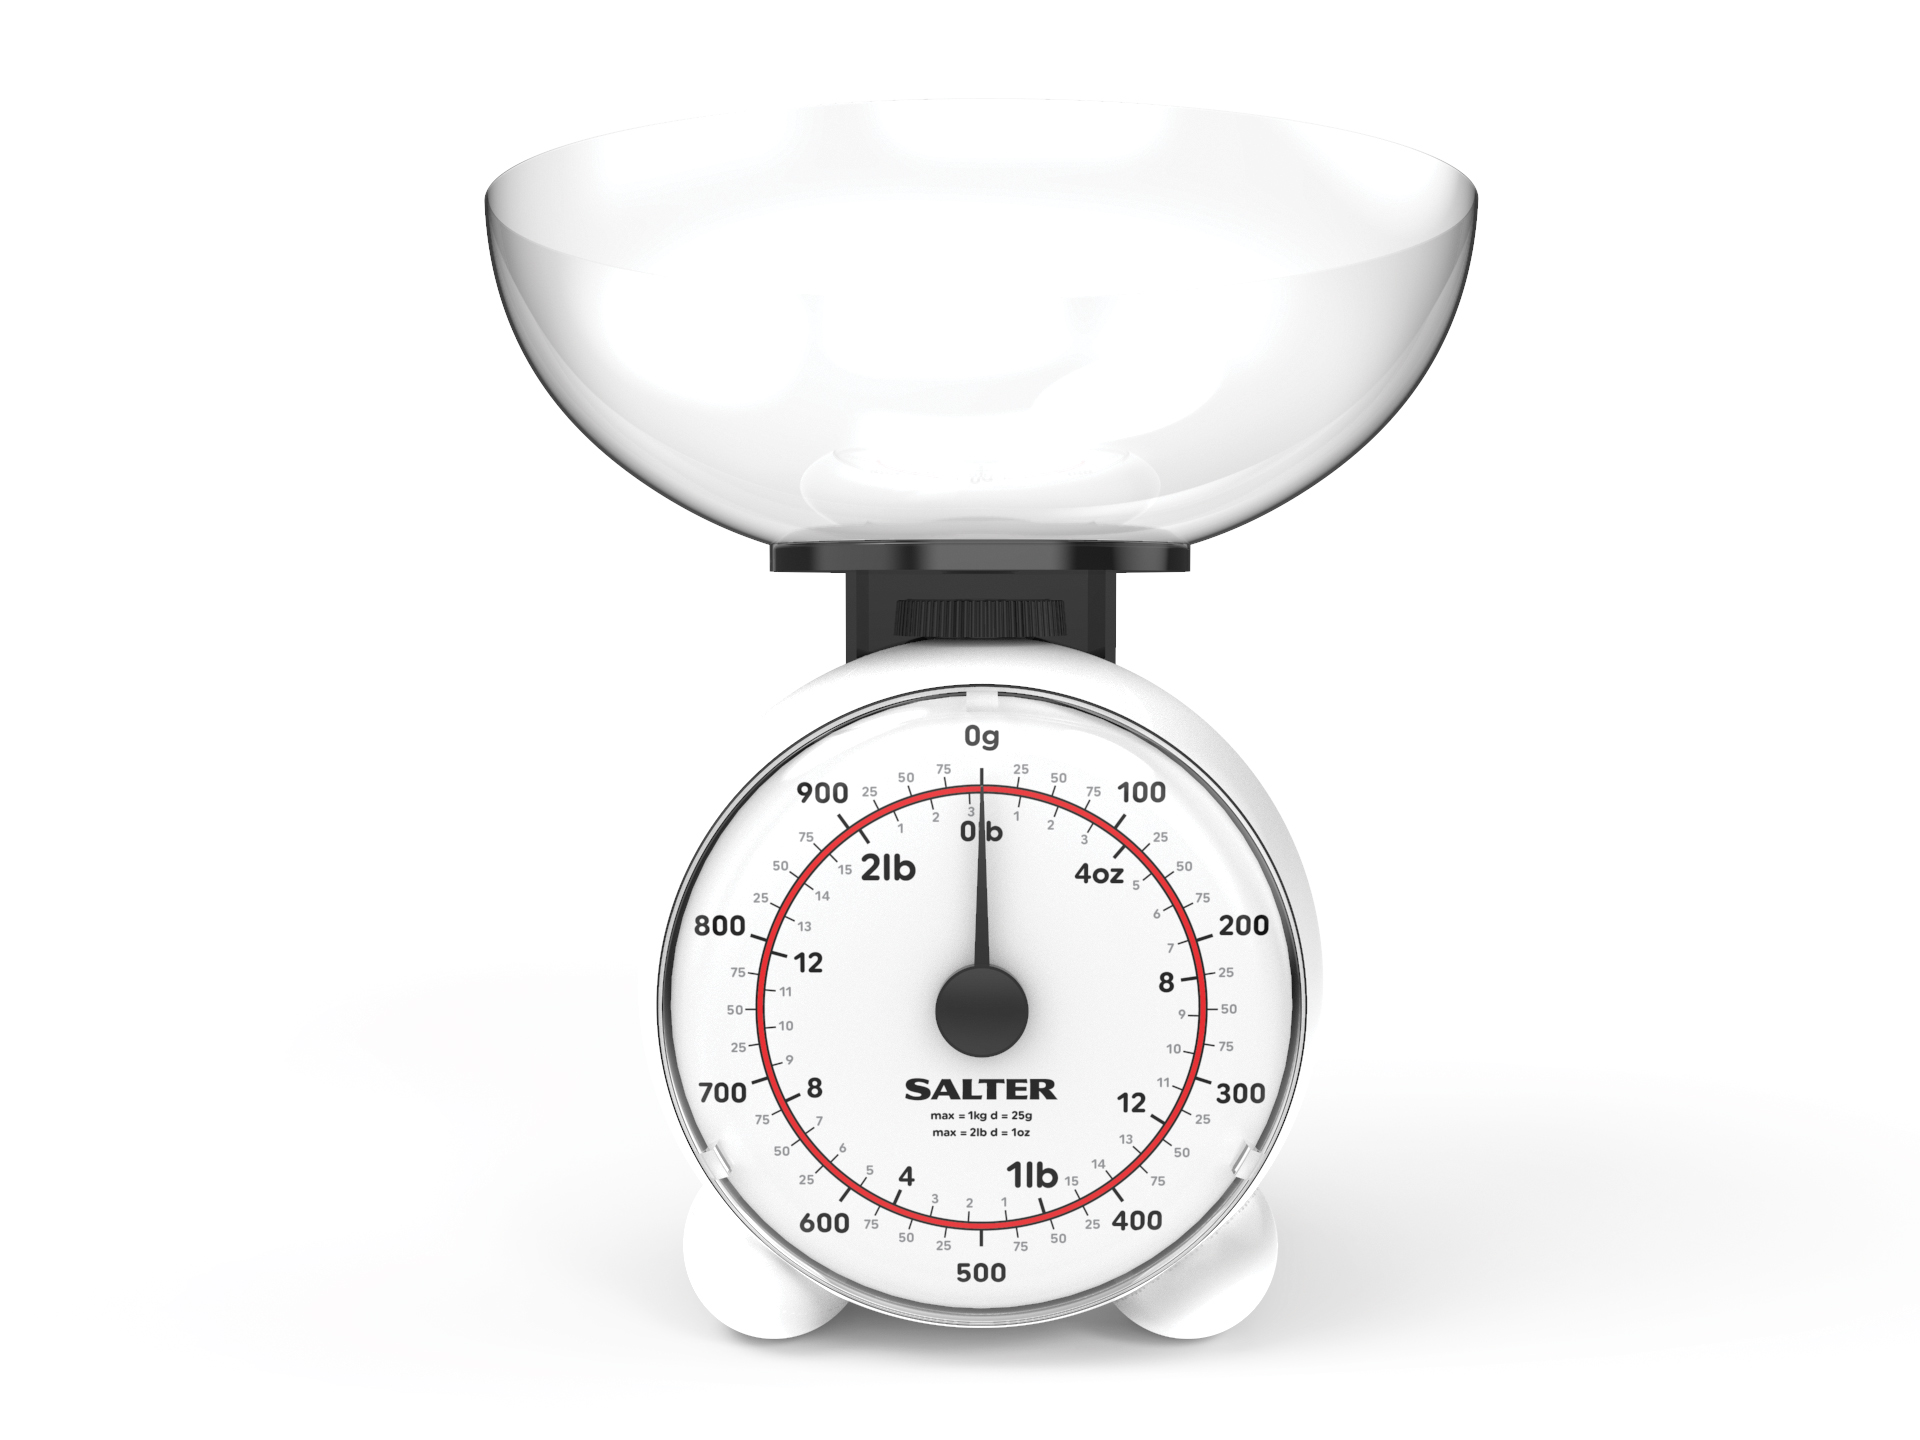 1kg Mechanical Scale - White